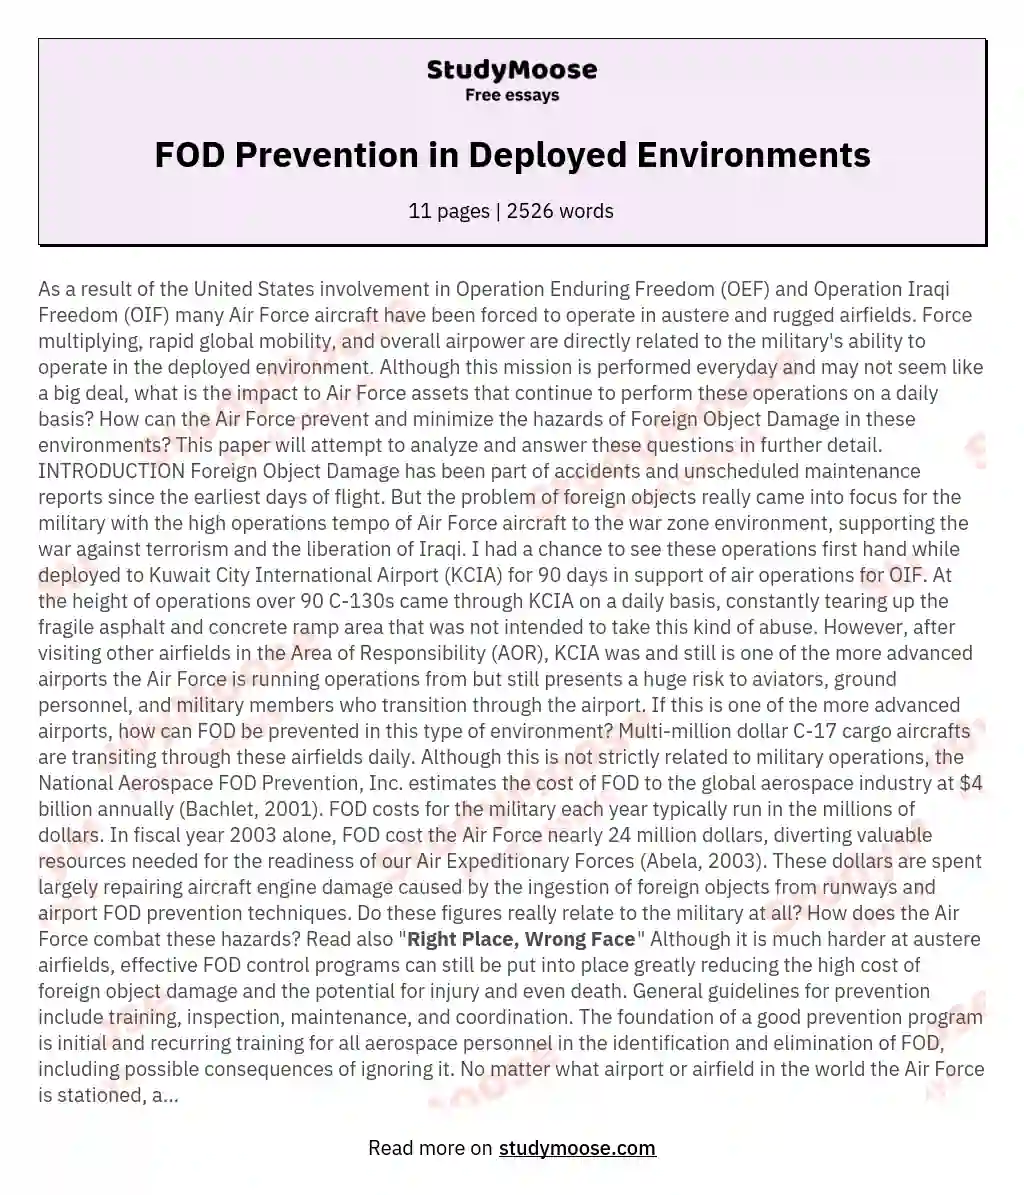 FOD Prevention in Deployed Environments essay